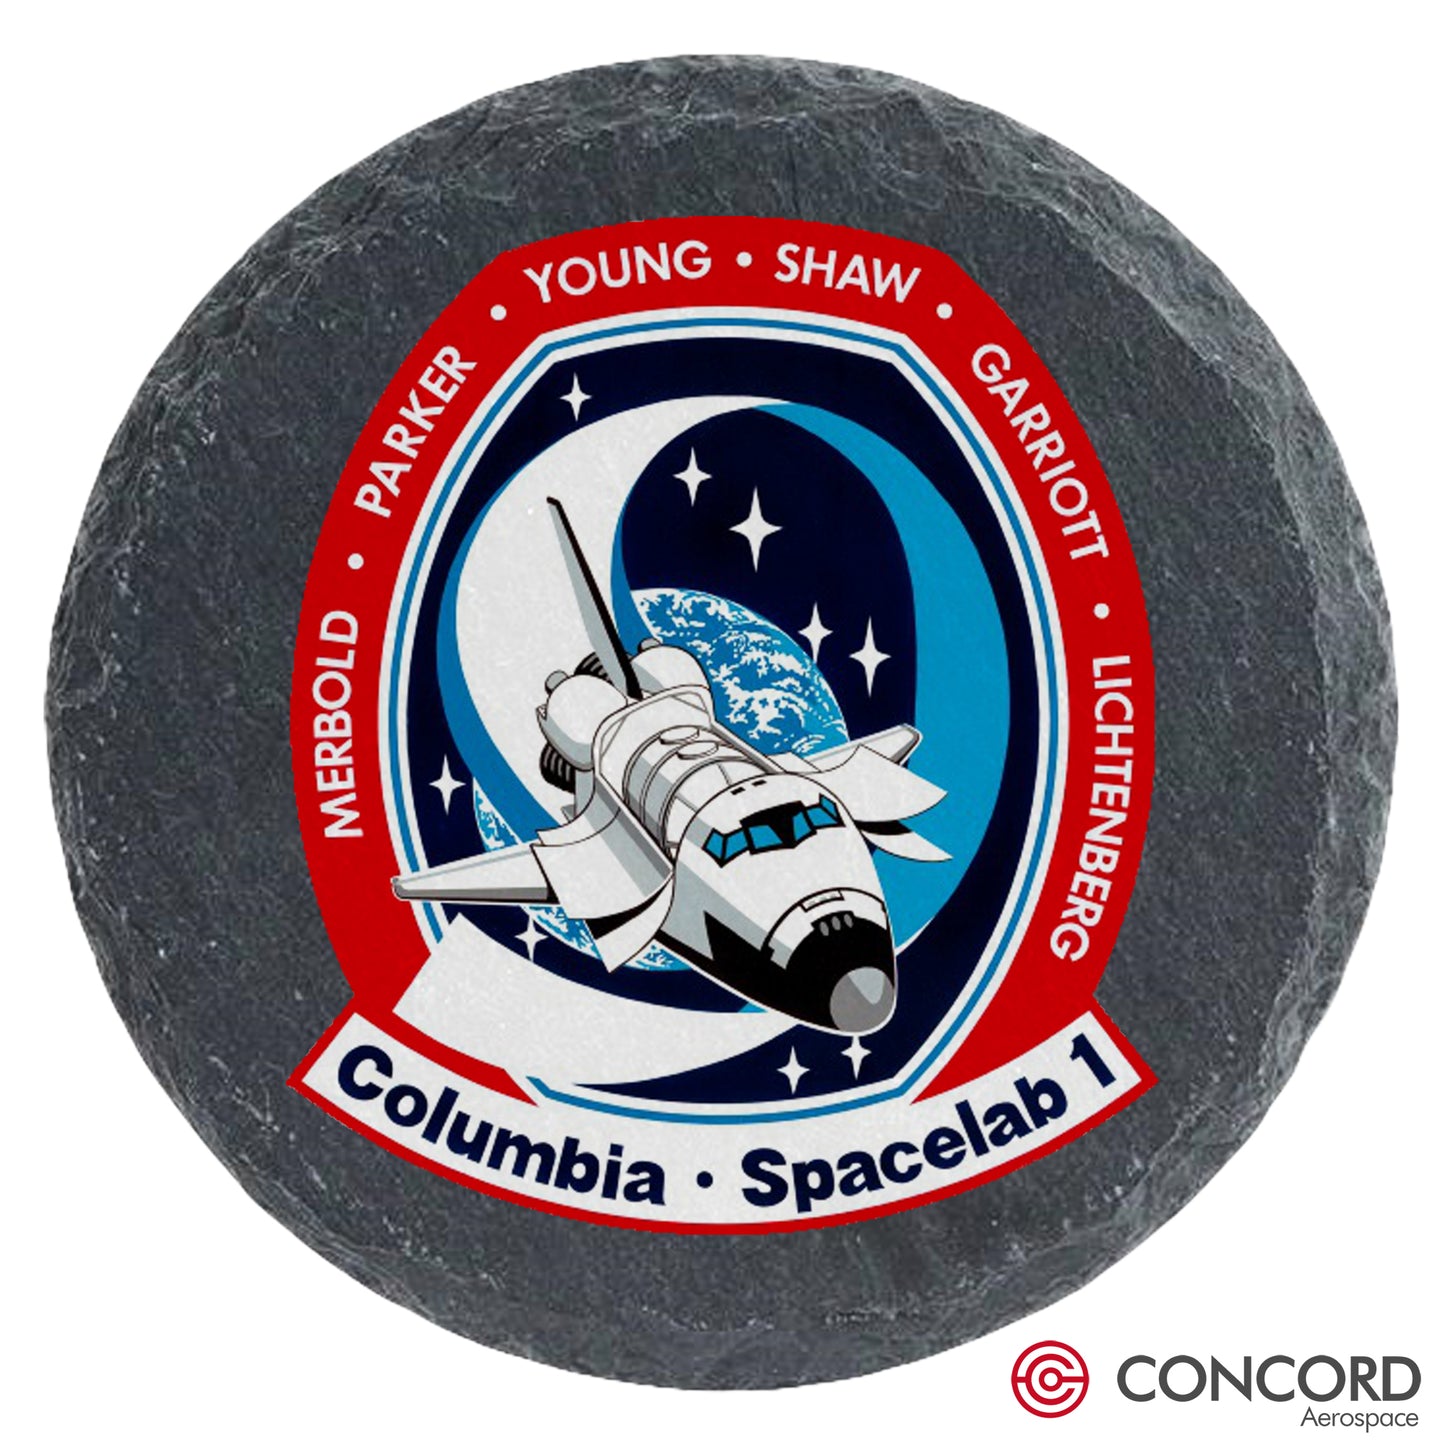 STS - 9 SPACE SHUTTLE - SLATE COASTER - Concord Aerospace Concord Aerospace Concord Aerospace Coasters